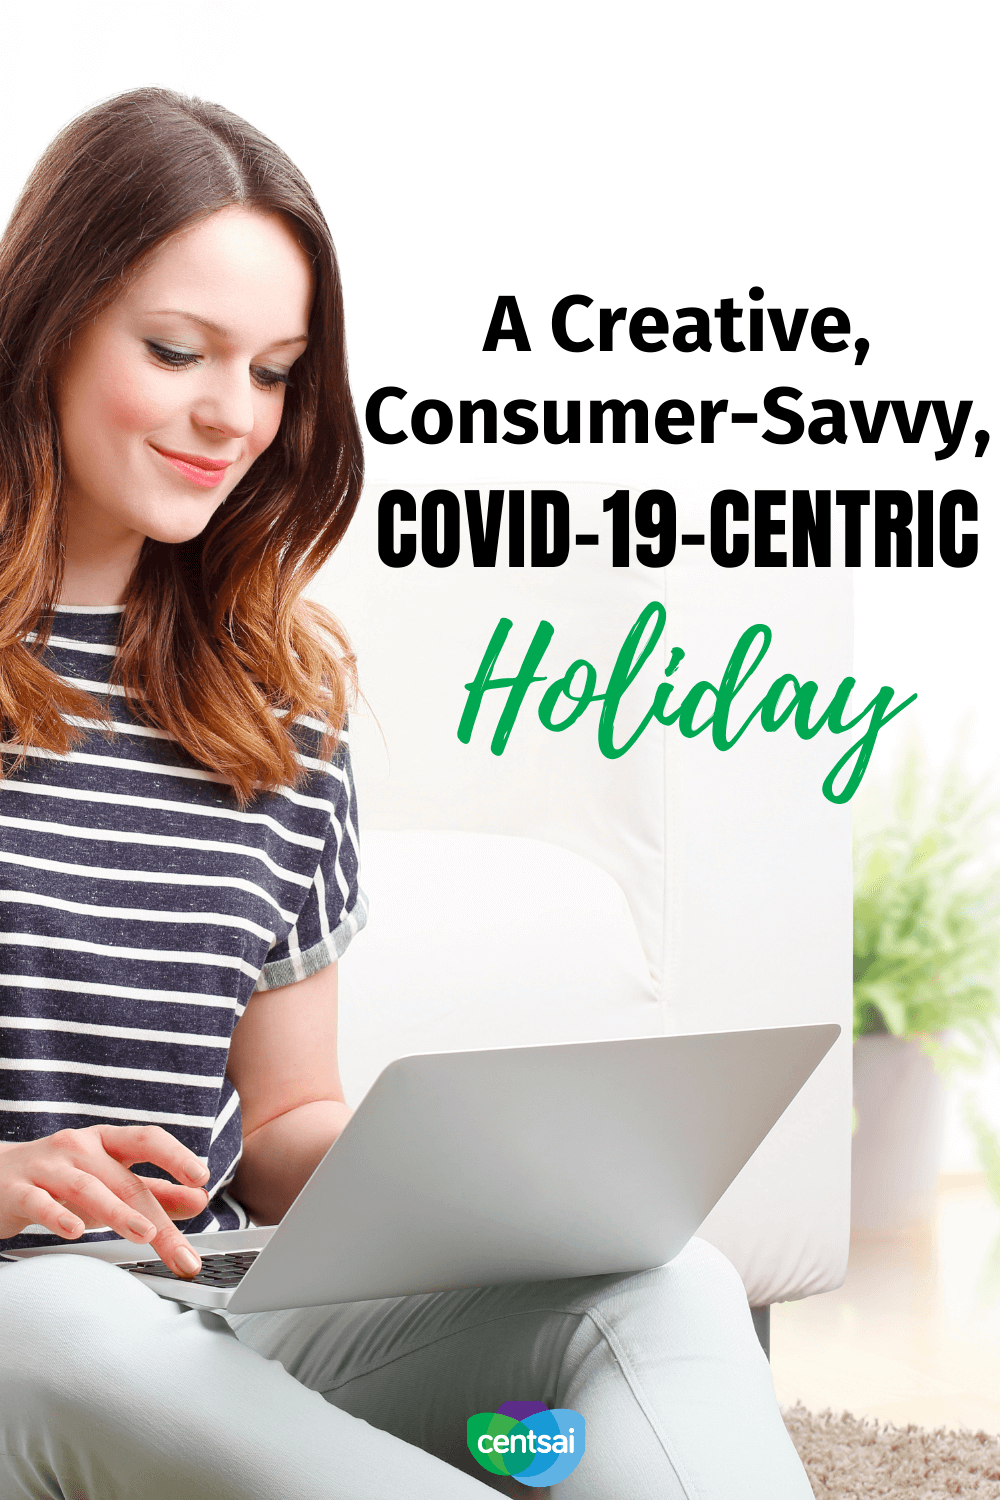 A Creative, Consumer-Savvy, COVID-19-Centric Holiday. Maintain your personal well-being (both financially and otherwise) with these 12 recommendations for your COVID-19 holiday planning. #CentSai #financialplanning #personalfinancetips #frugality